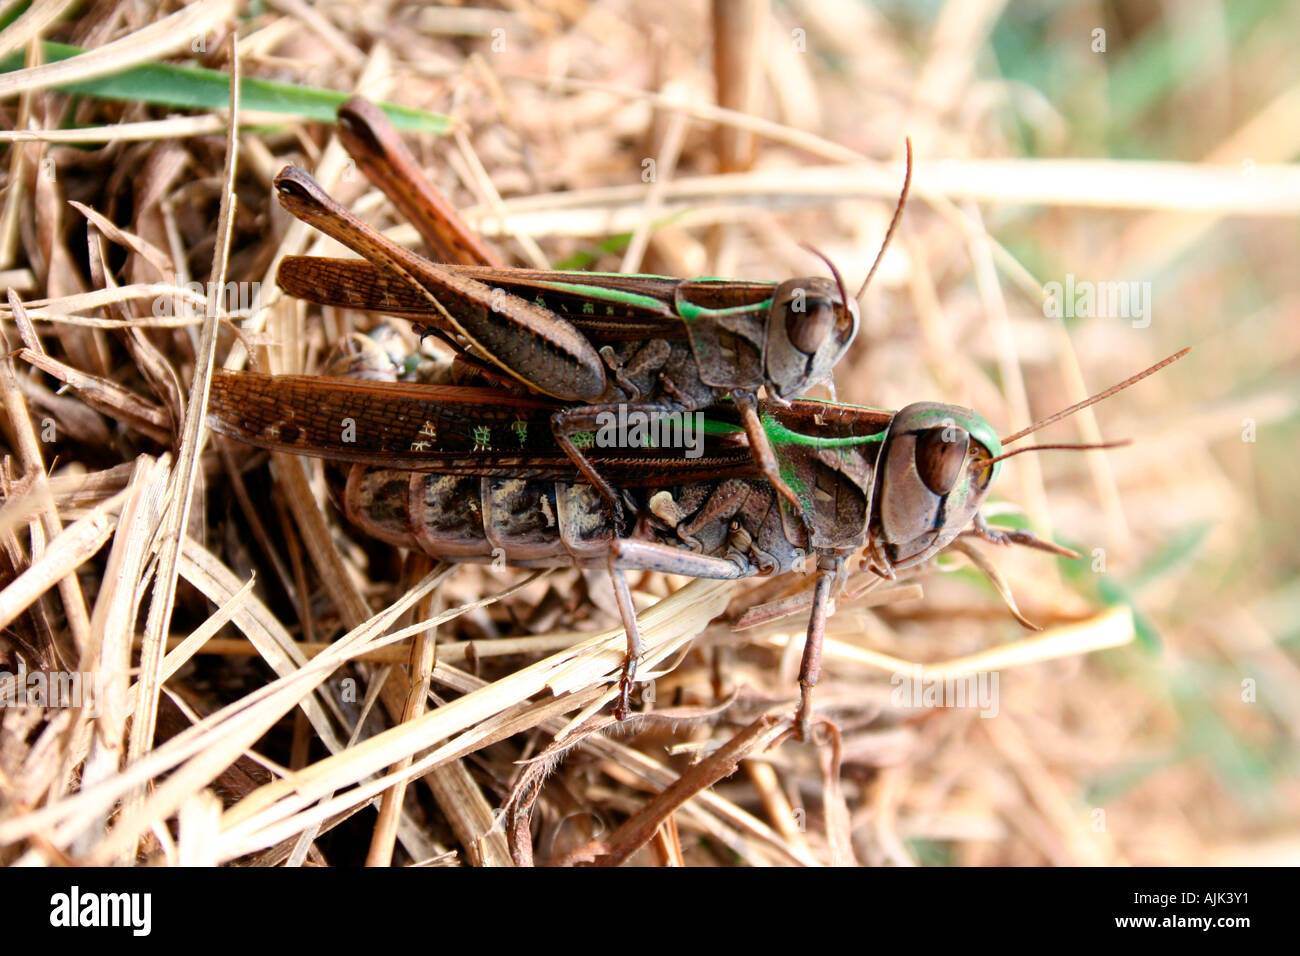 A pair of grasshoppers in the process of mating Stock Photo